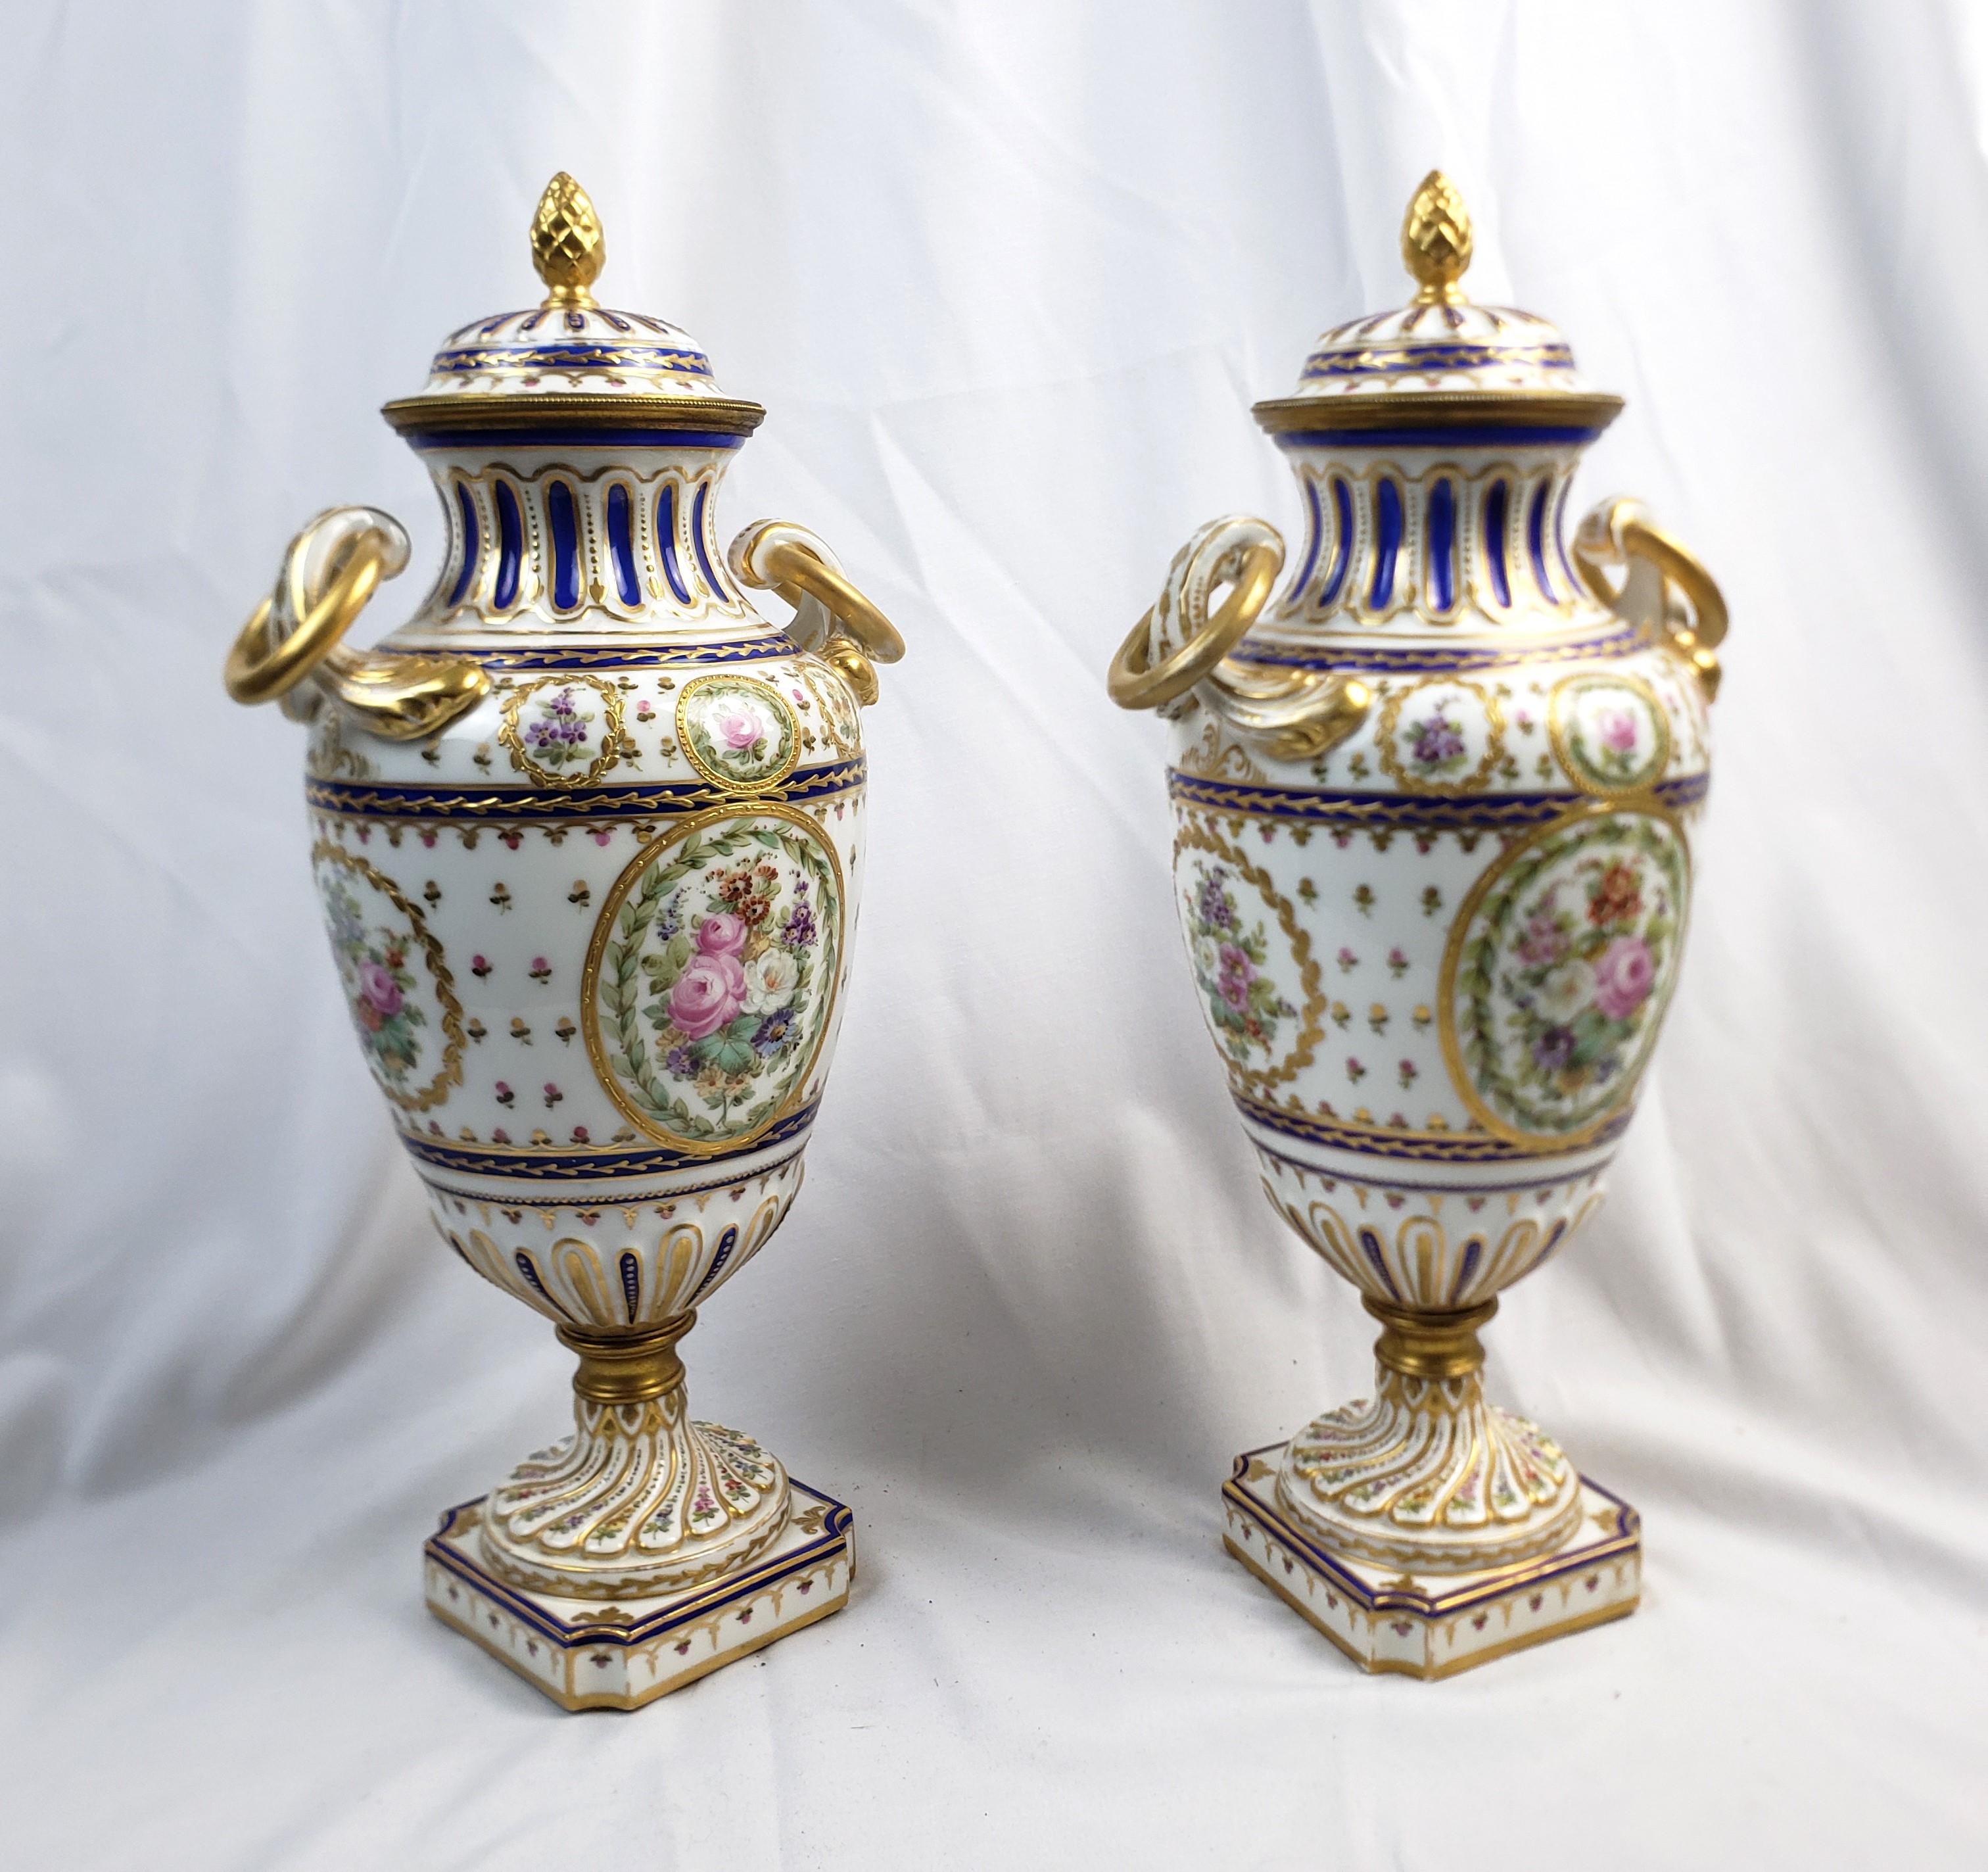 Renaissance Pair of Antique Sevres Styled Covered Urns with Ornate Hand-Painted Decoration For Sale